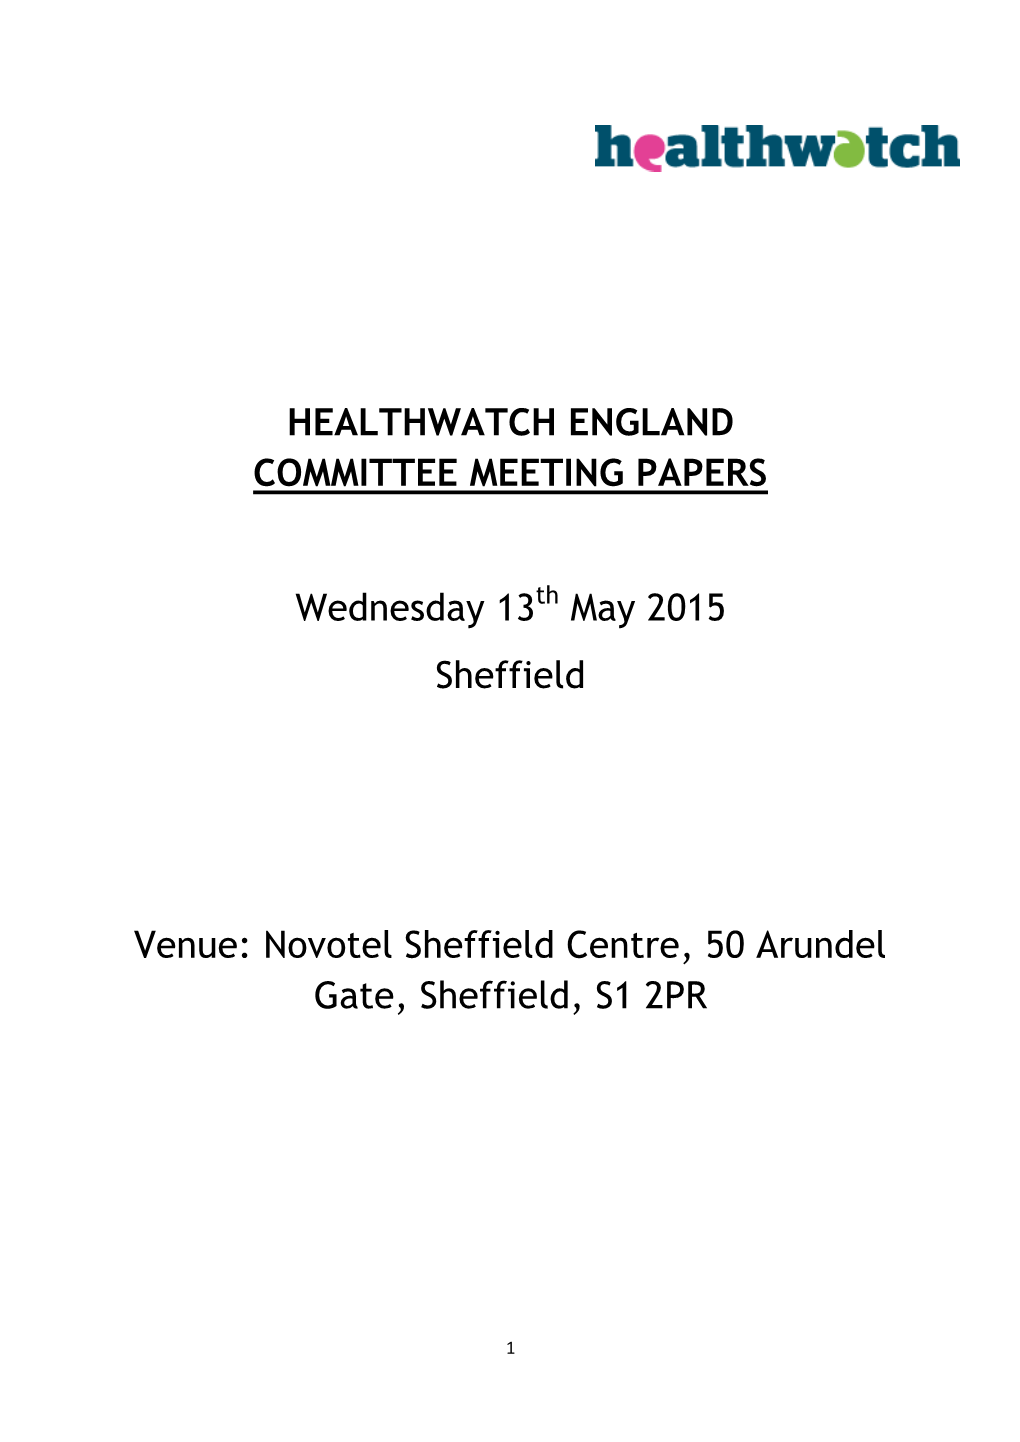 Healthwatch England Committee Meeting Papers